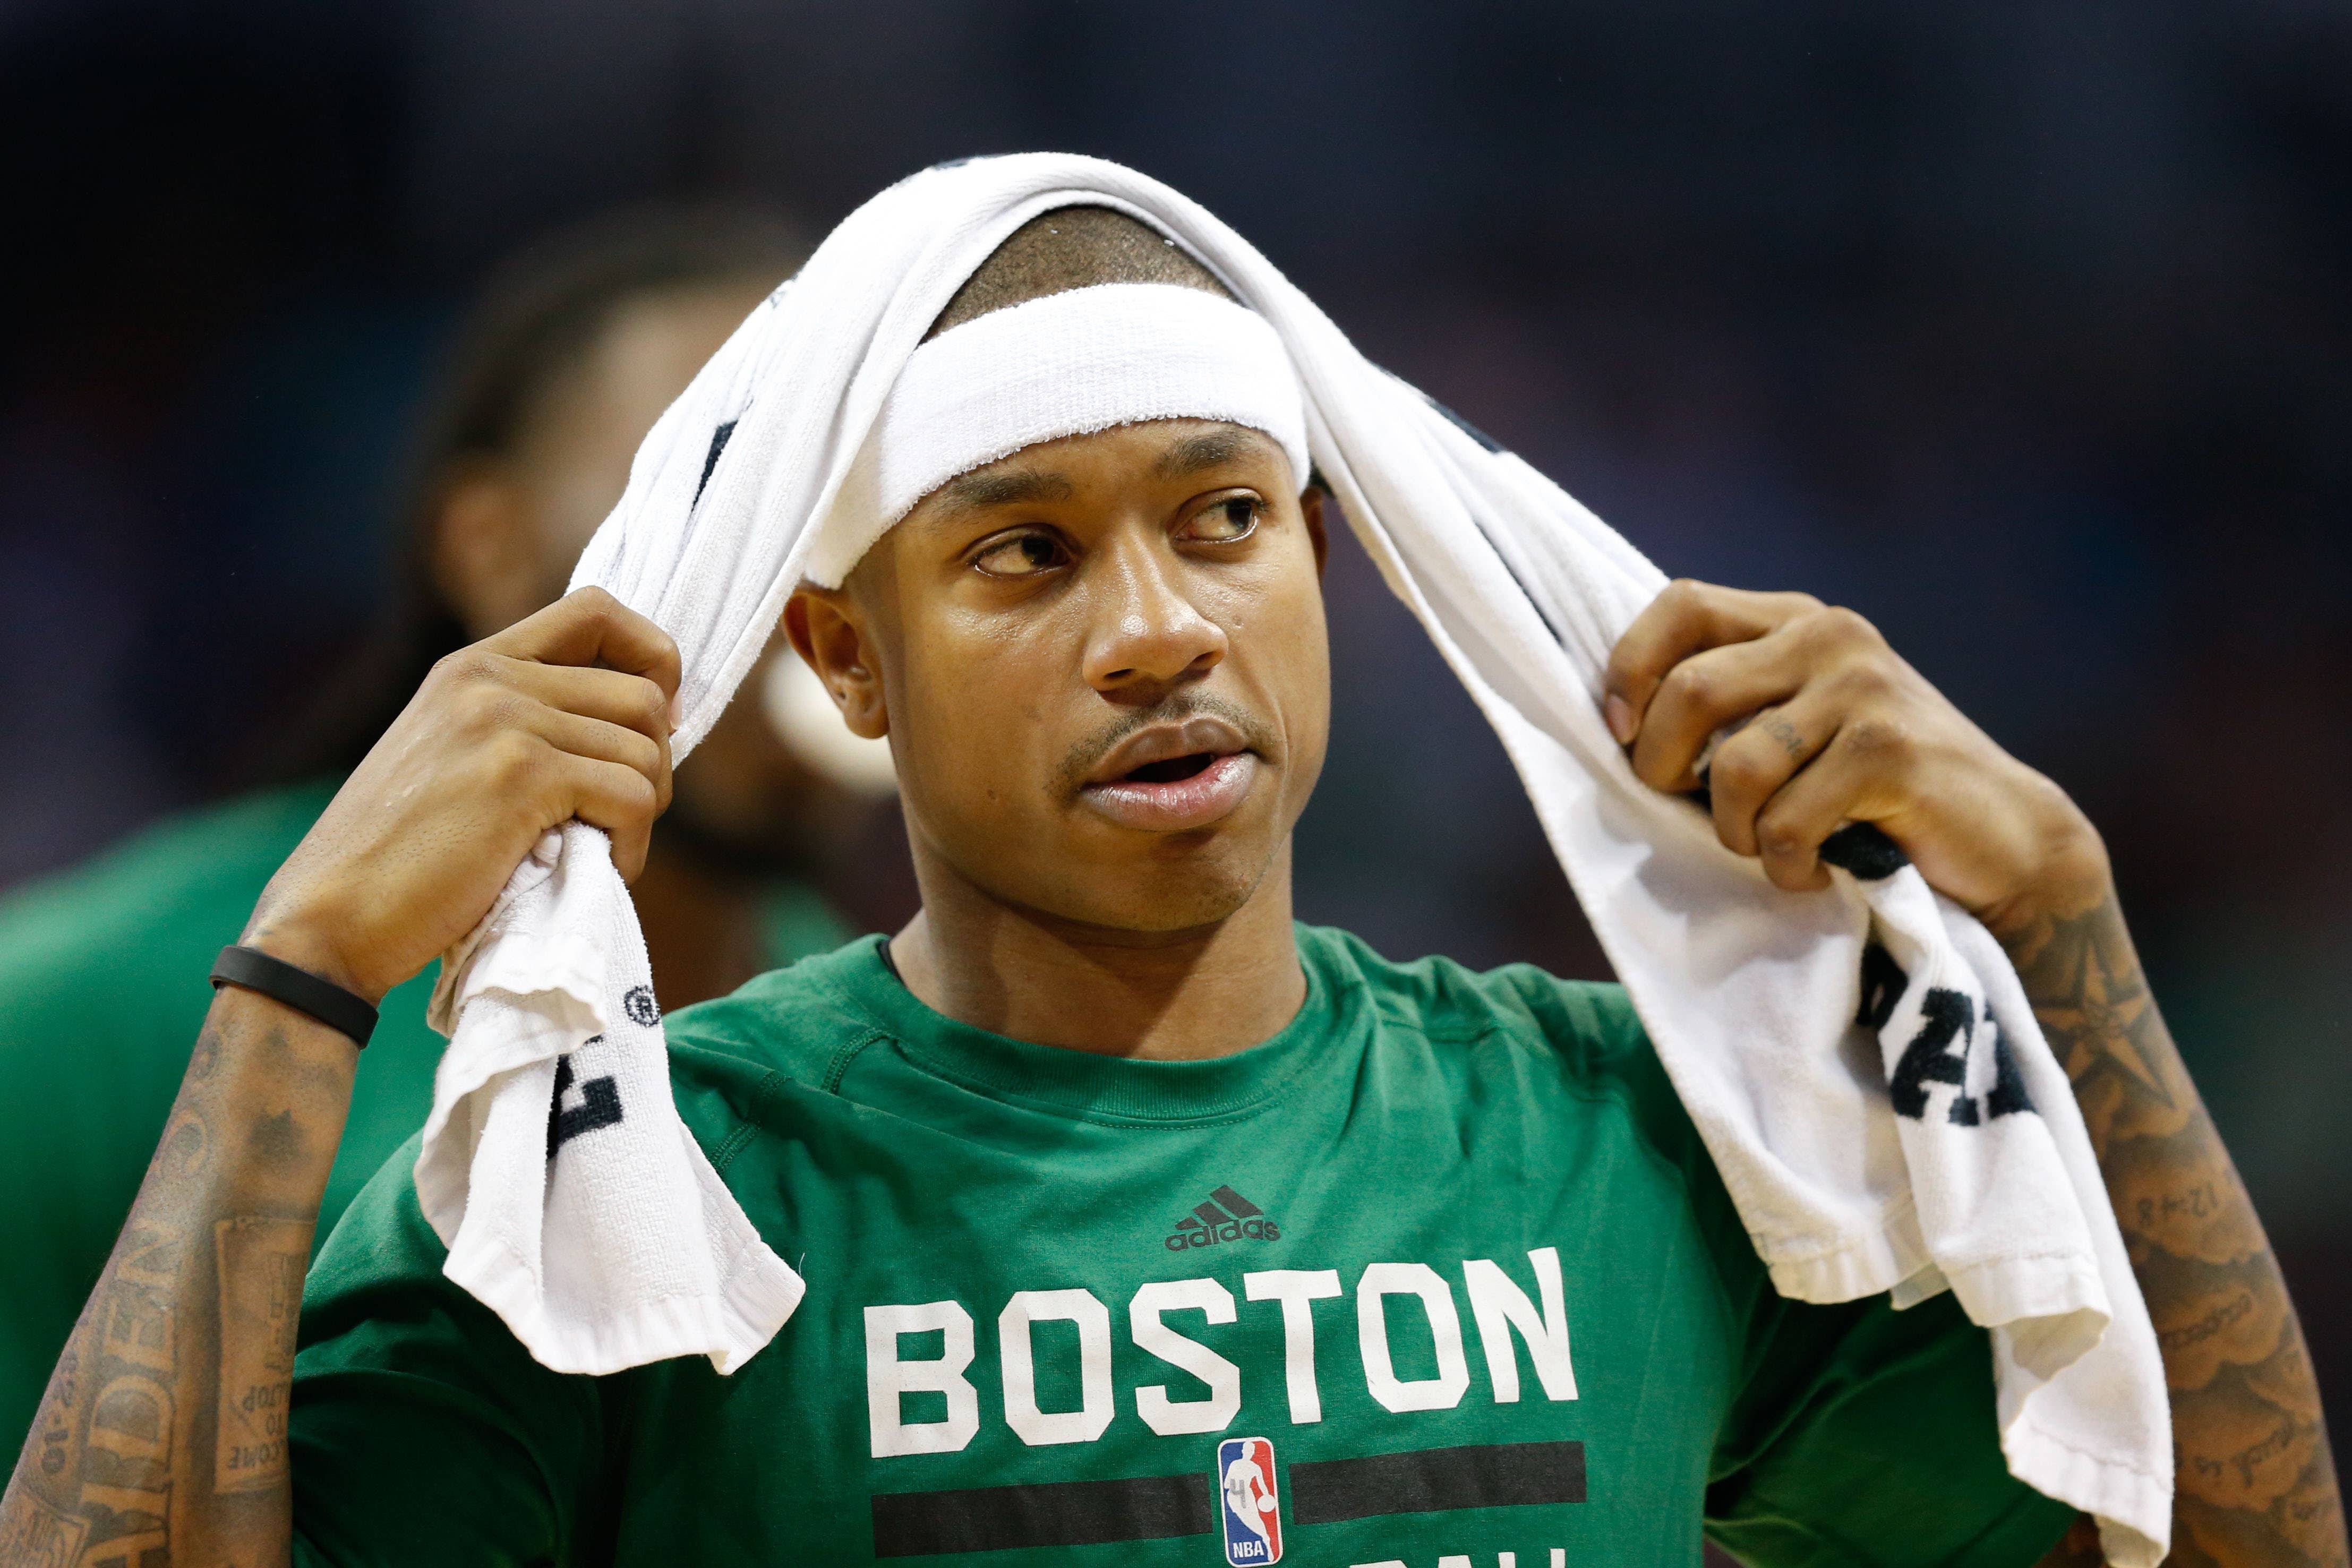 15 Things You Probably Didn't Know About Isaiah Thomas